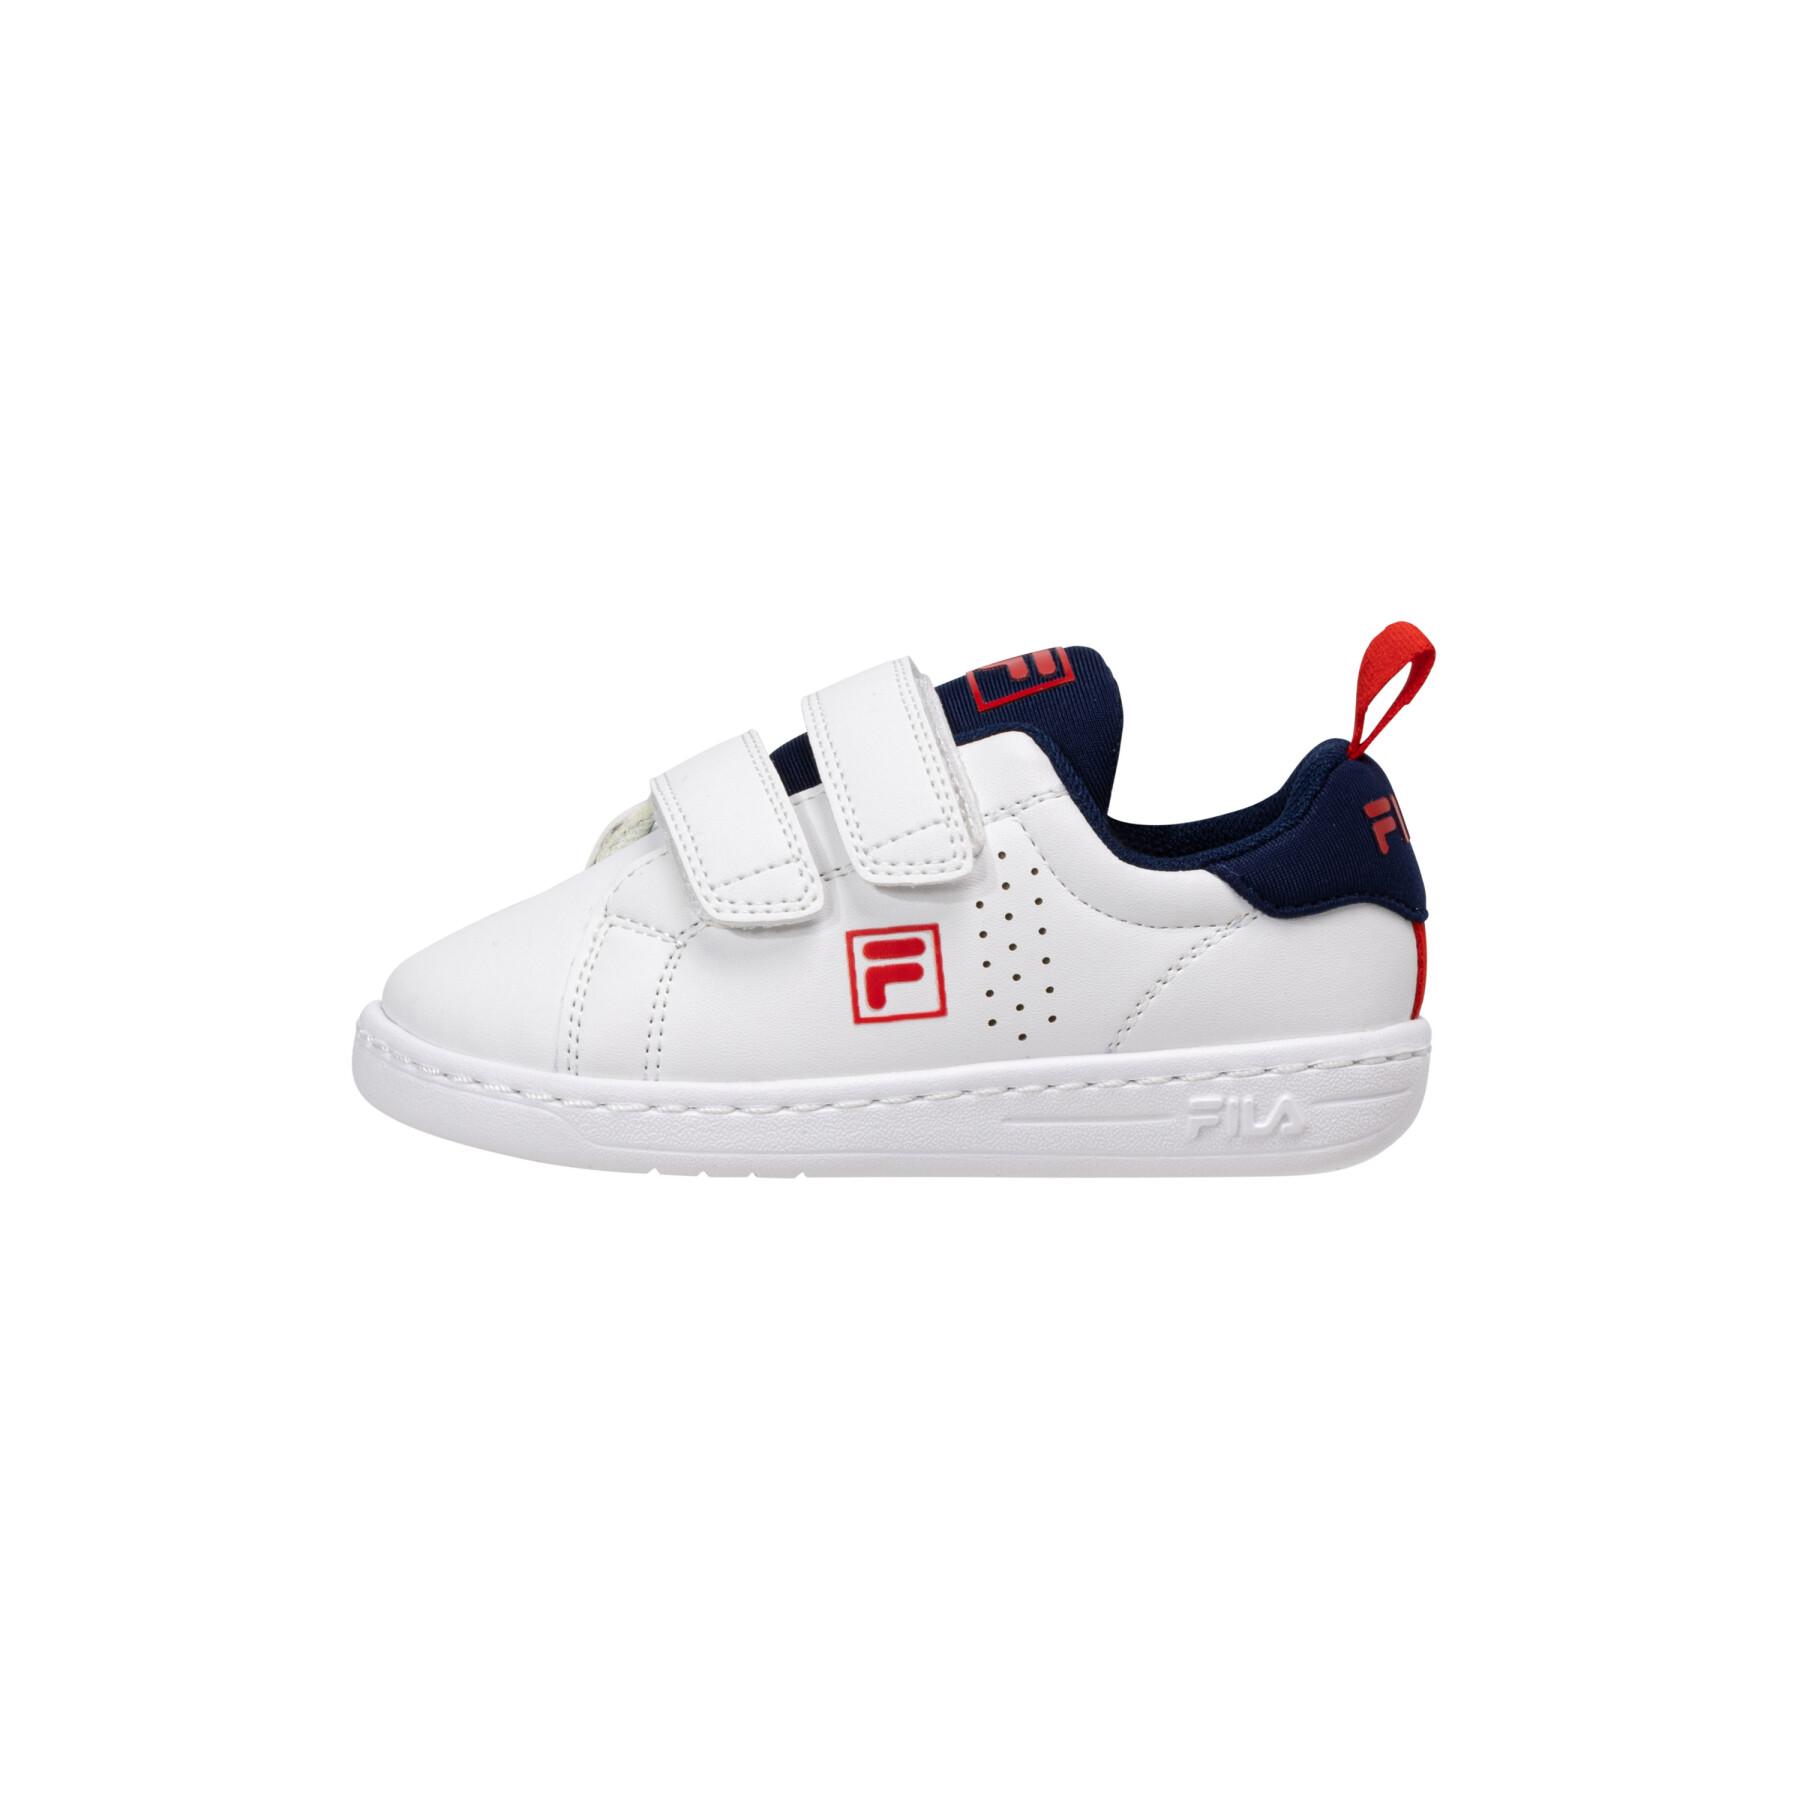 Velcro baby sneakers Fila Crosscourt 2 NT A - Baby Sneakers - Baby Shoes -  Baby